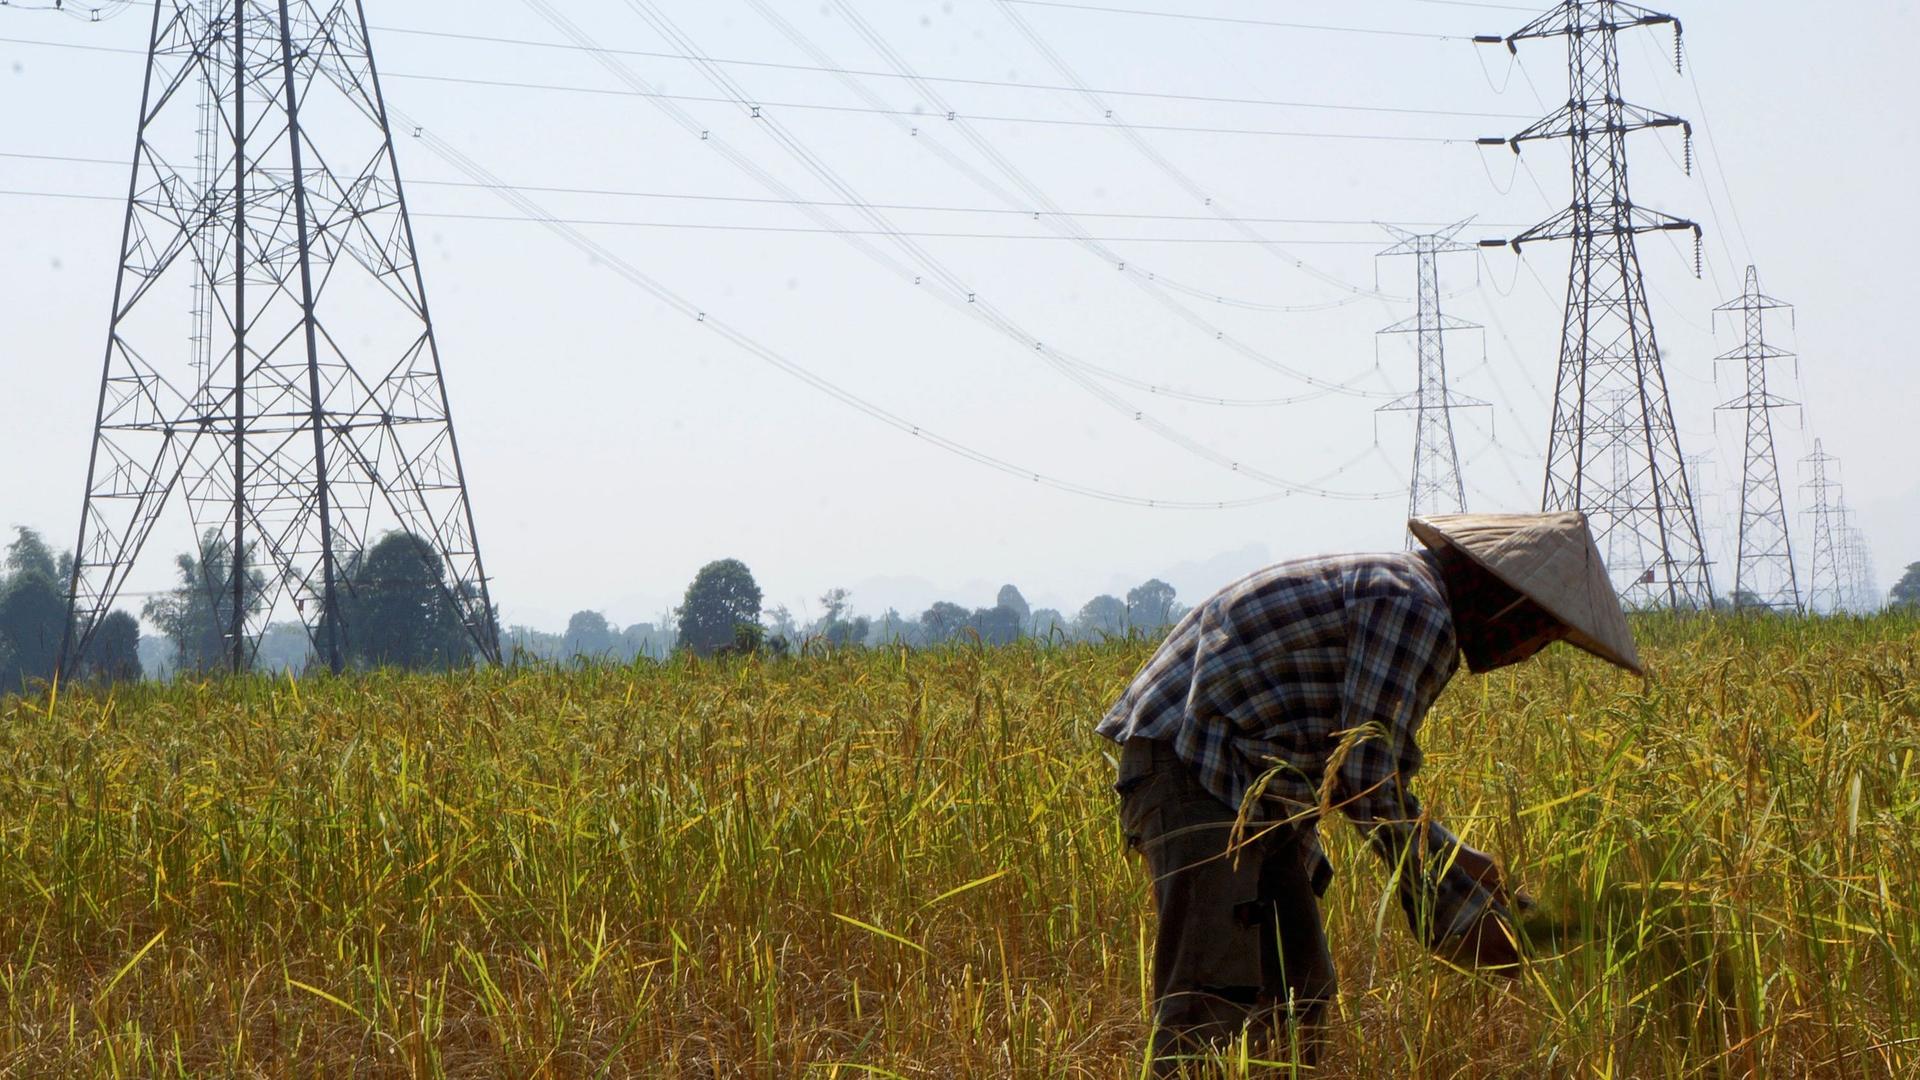 A farmer works in a paddy field under the power lines near Nam Theun 2 dam in Khammouane province in Laos, Oct. 28, 2013. 